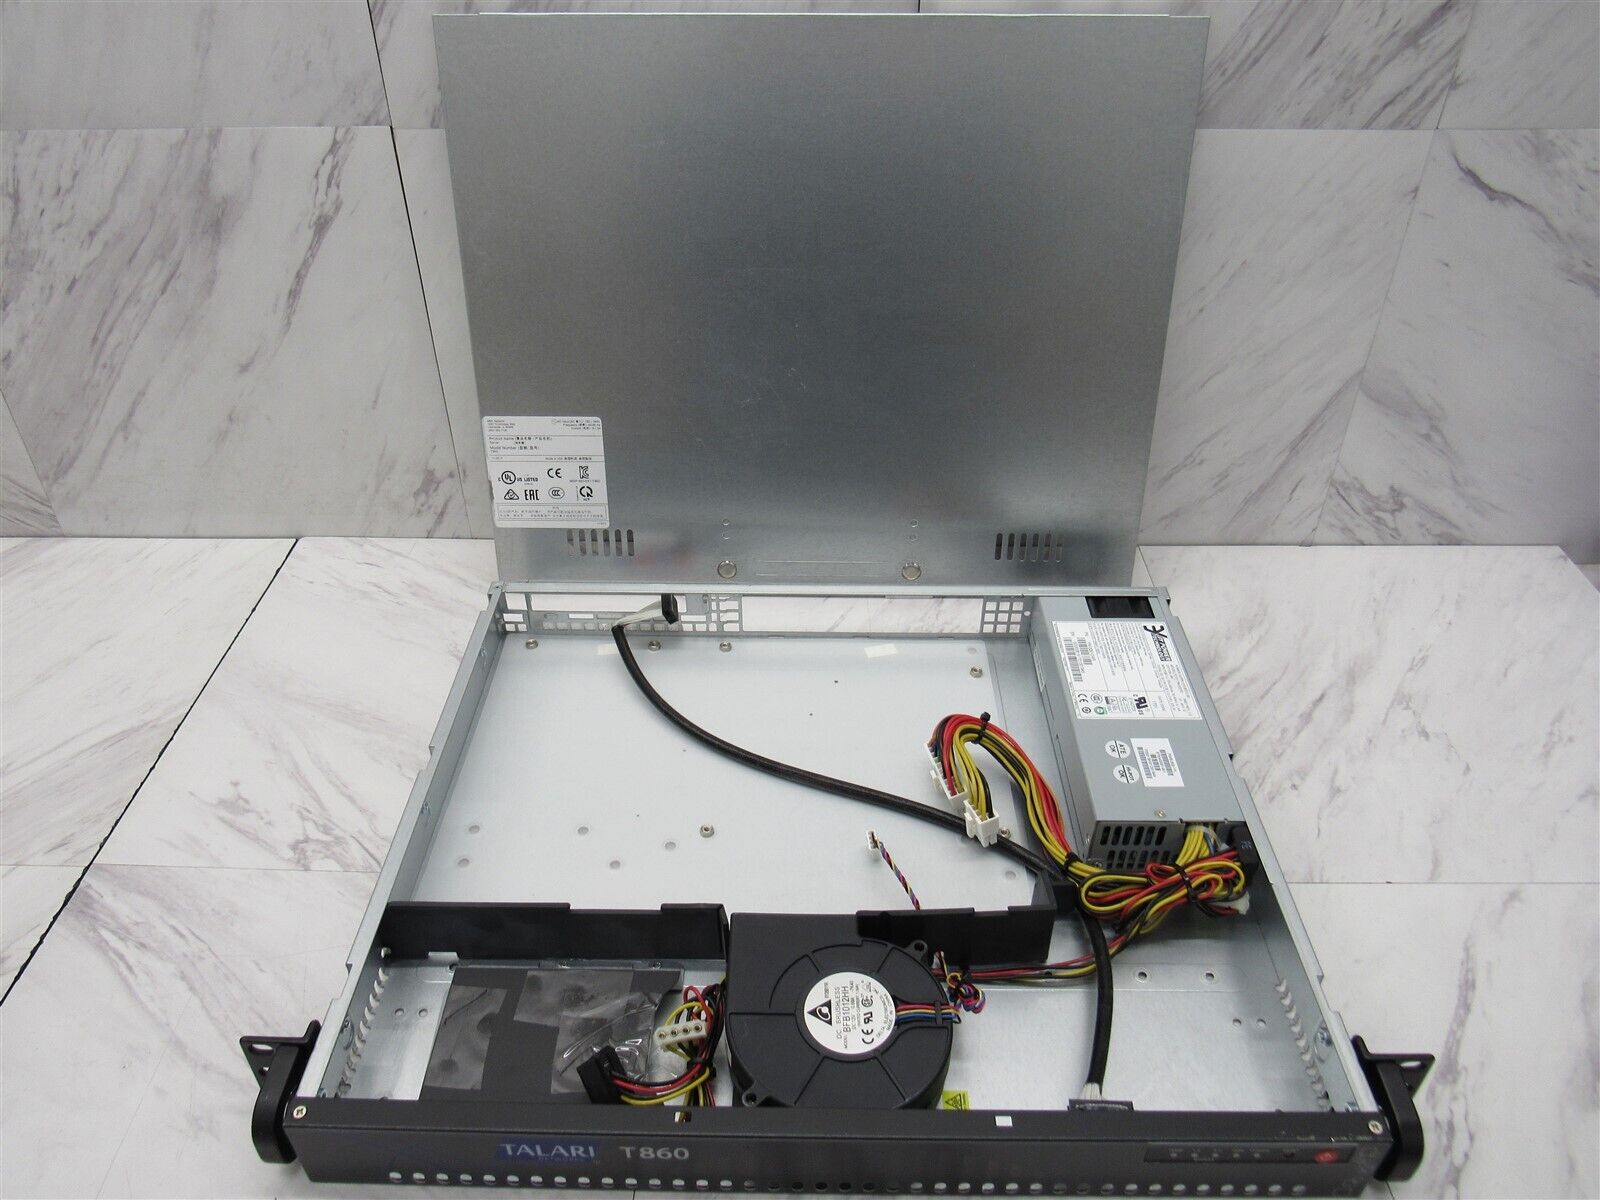 Supermicro Talari SuperChassis 1U CSE-512 Sever Chassis w/ Power Supply Fan Ears